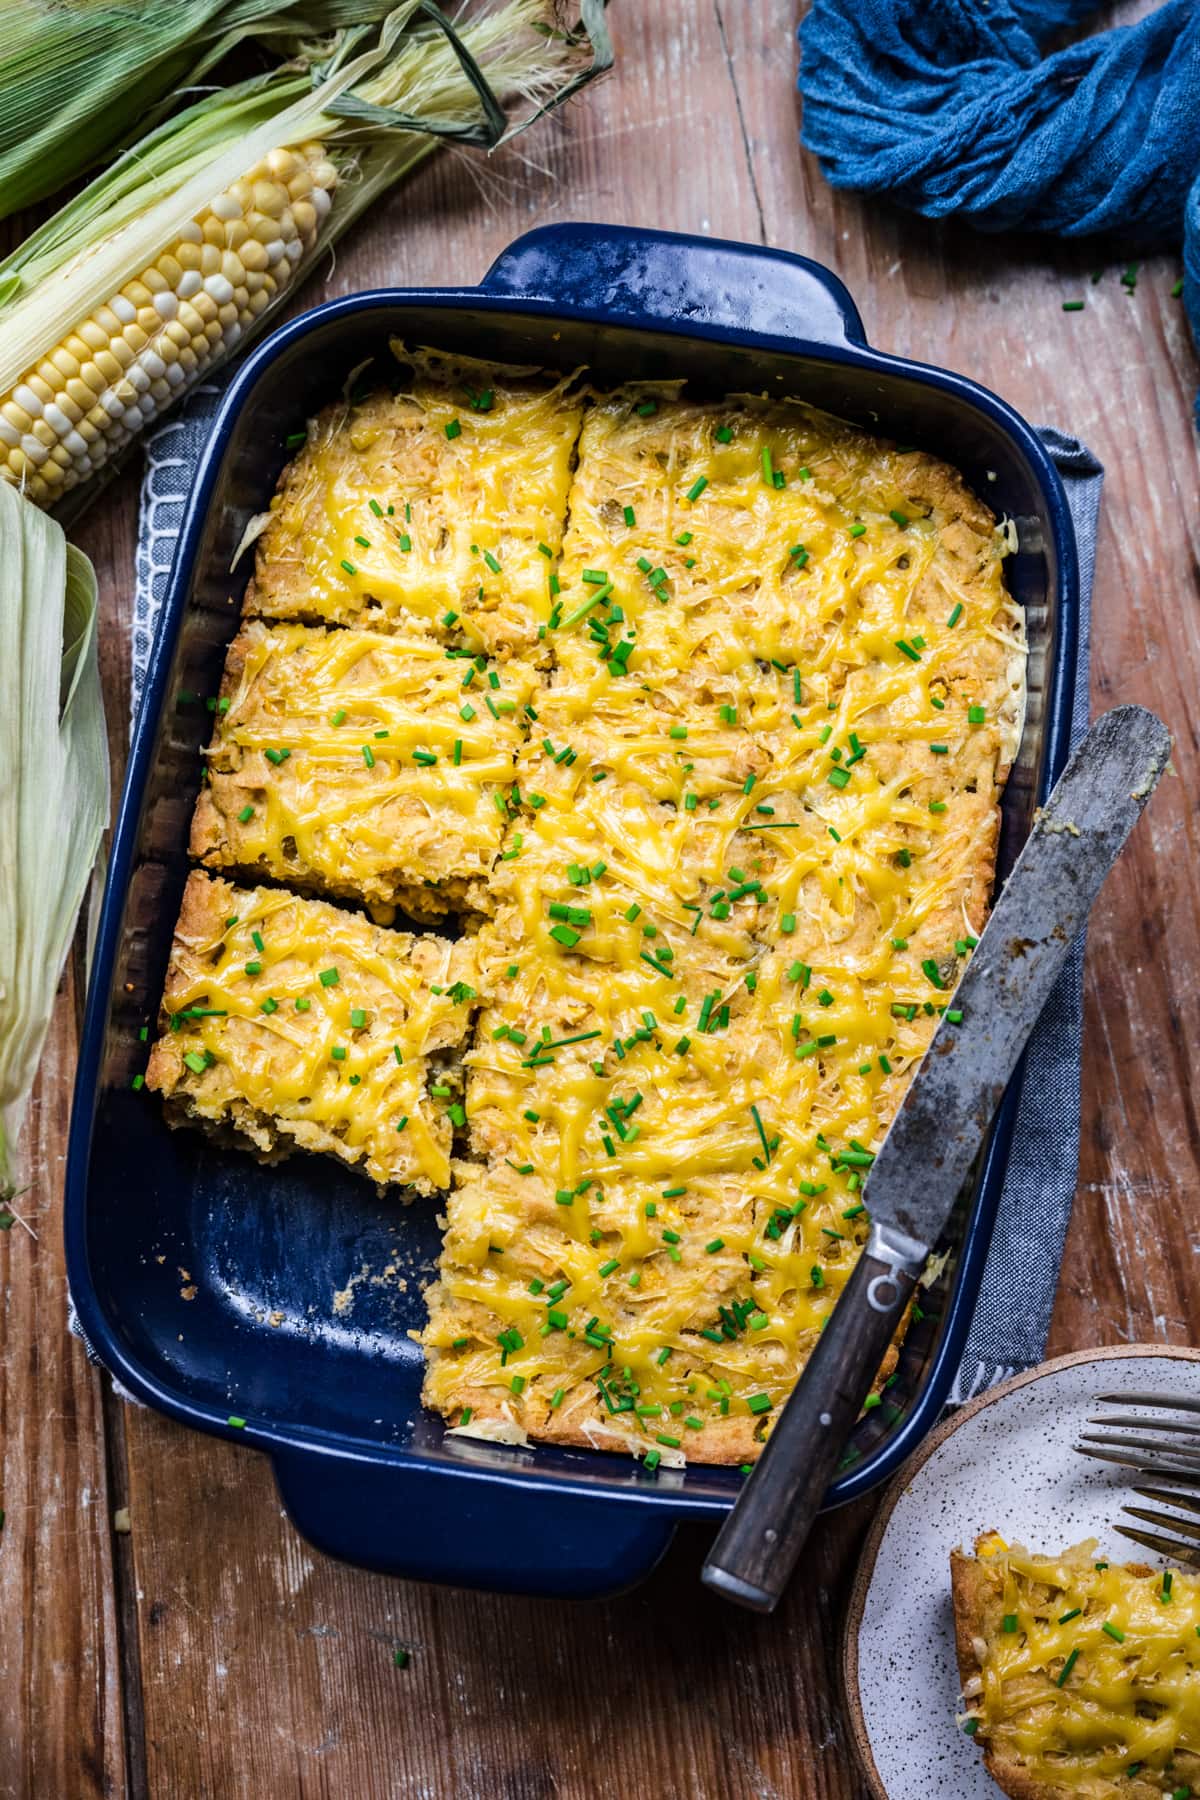 Overhead view of corn casserole in a blue baking dish with a spatula on top.